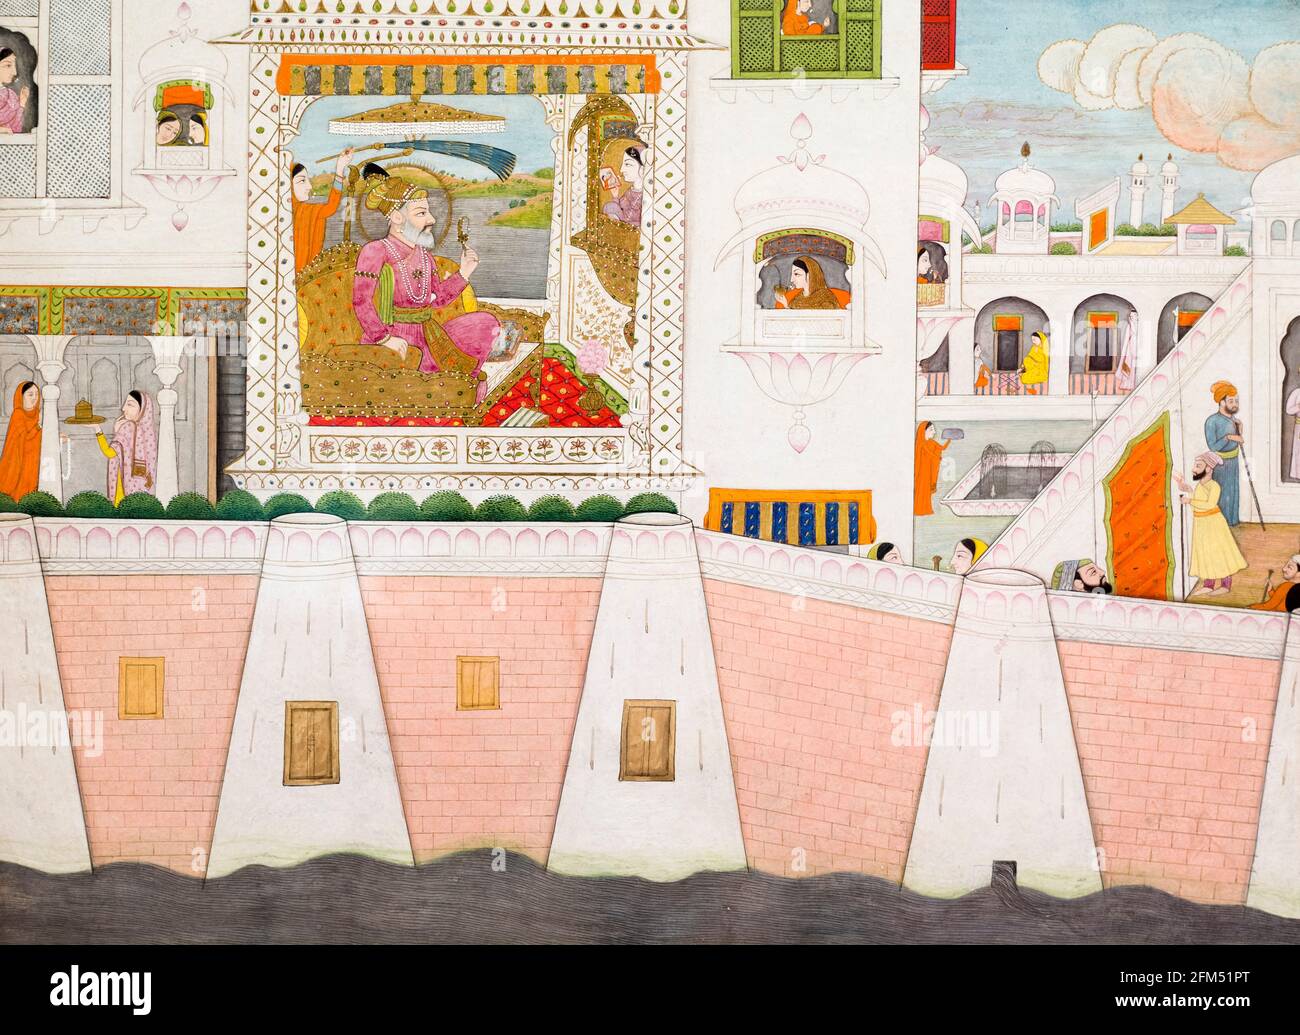 Palace scene with Shah Jahan (1592-1666), fifth Mughal Emperor, painting 1700-1725 Stock Photo